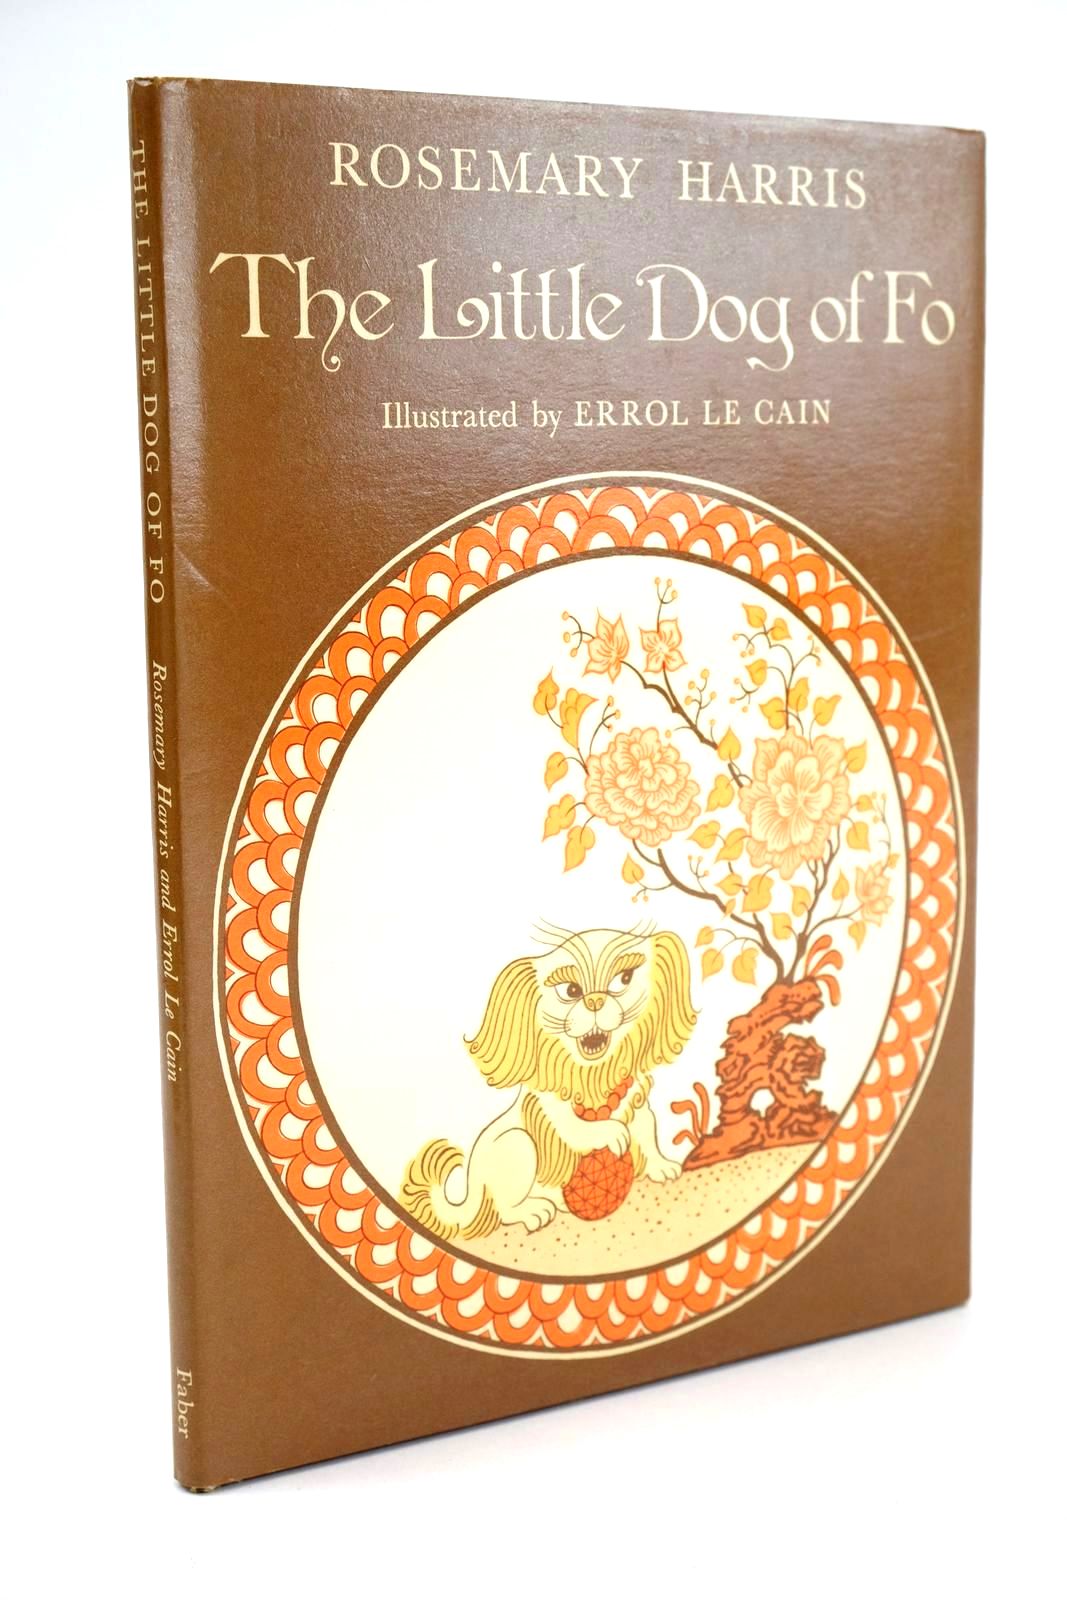 Photo of THE LITTLE DOG OF FO written by Harris, Rosemary illustrated by Le Cain, Errol published by Faber &amp; Faber Ltd. (STOCK CODE: 1325012)  for sale by Stella & Rose's Books